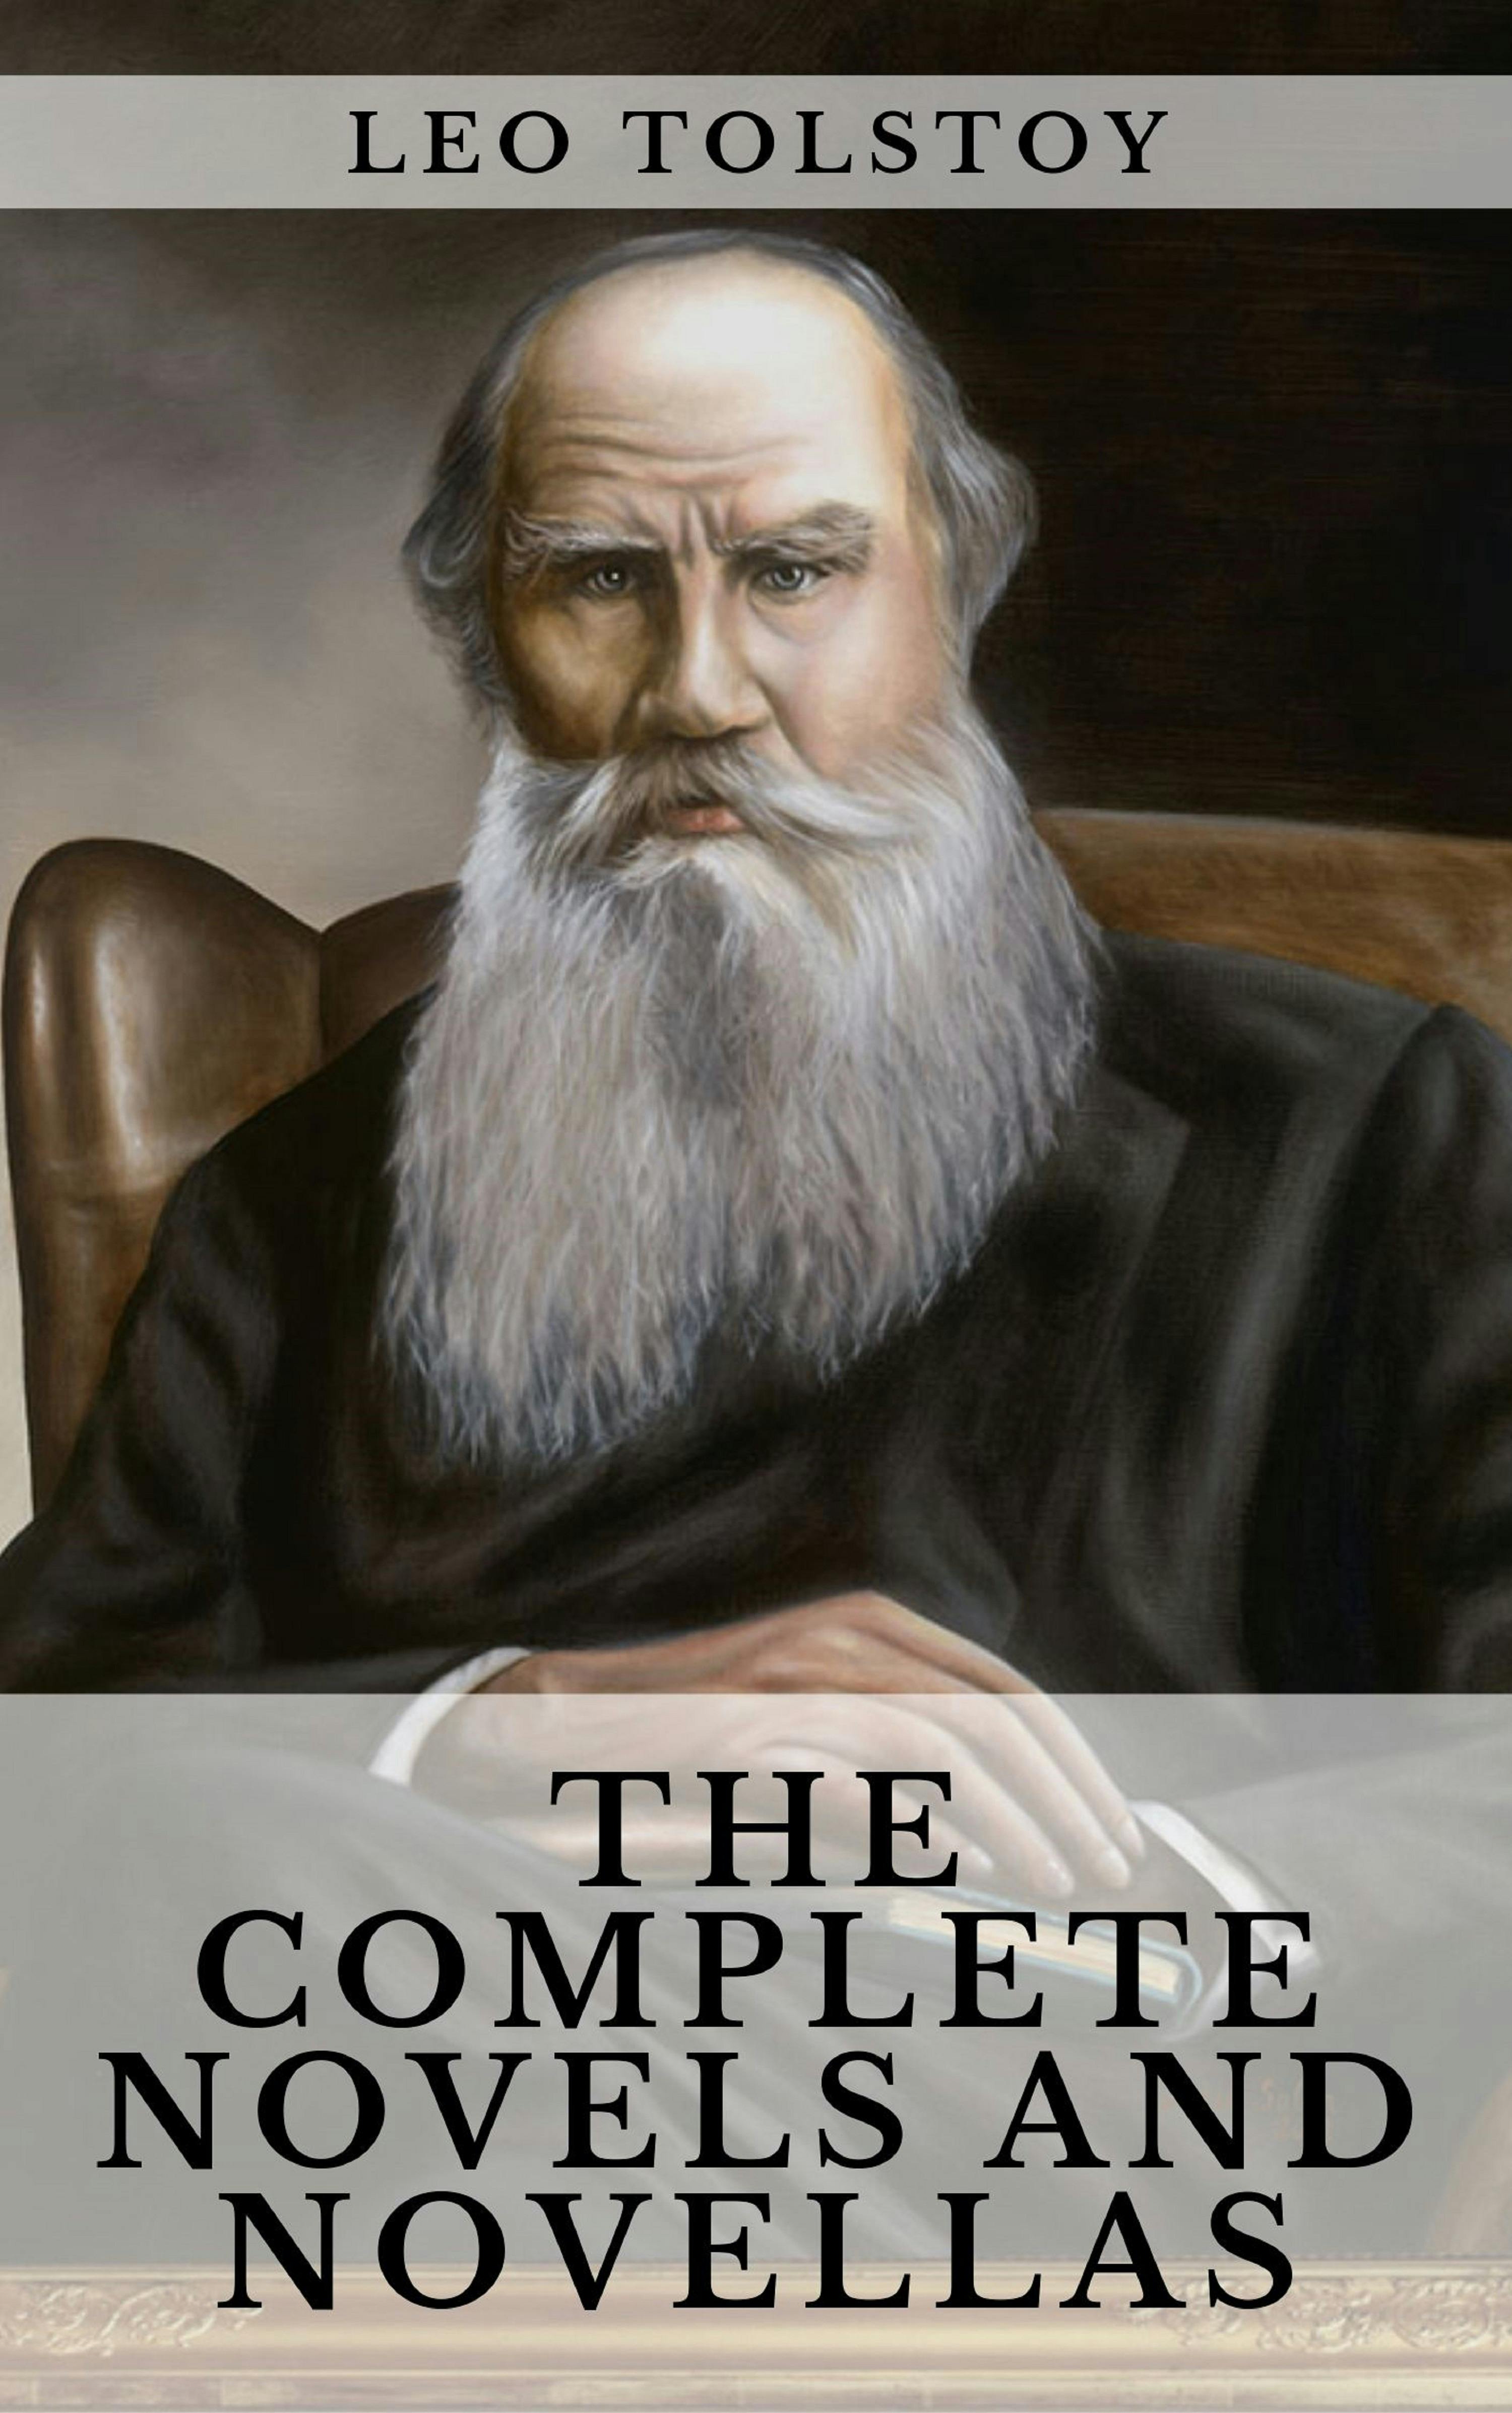 Leo Tolstoy: The Complete Novels and Novellas - undefined